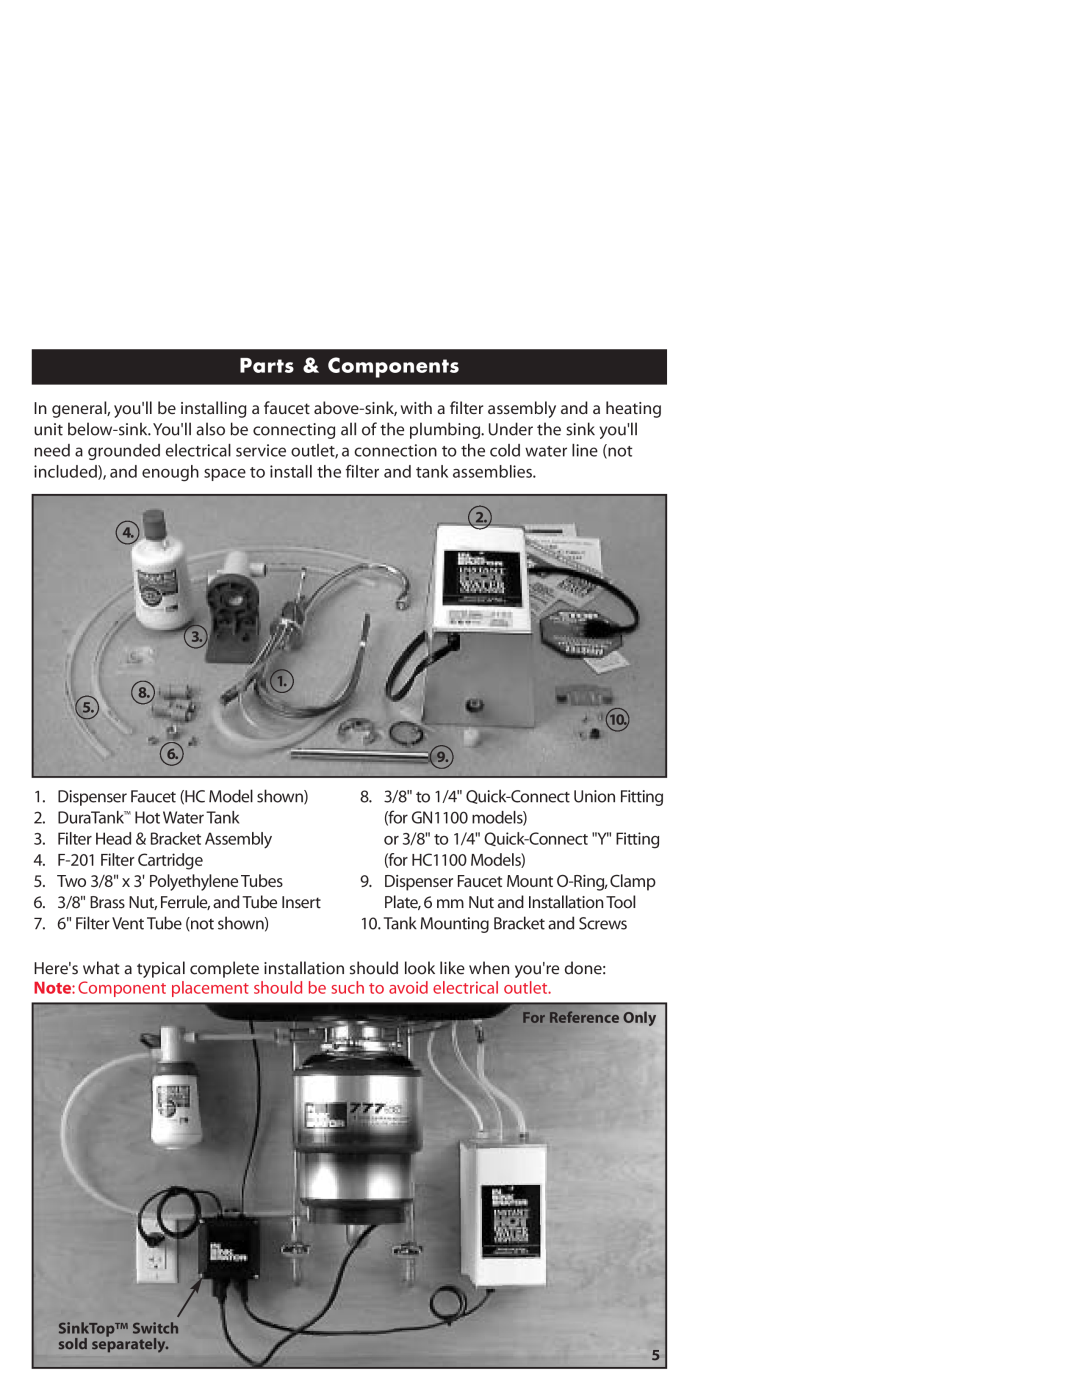 InSinkErator HC1100, GN1100 owner manual Parts & Components 